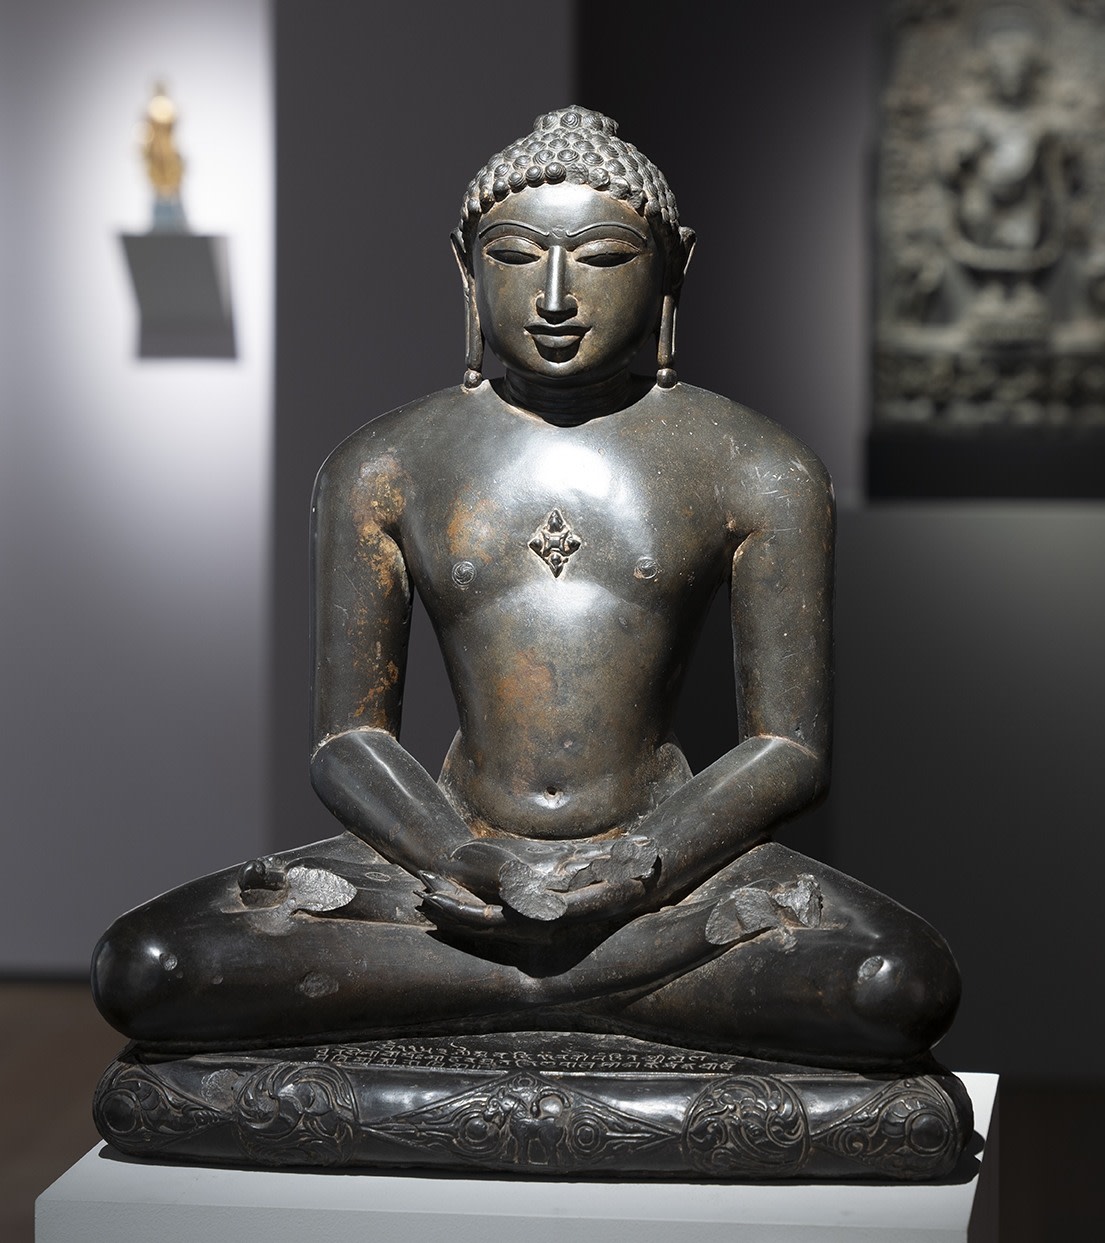 This elegant and highly-polished black stone figure of a jina is a superlative example of 11th-century Jain sculpture